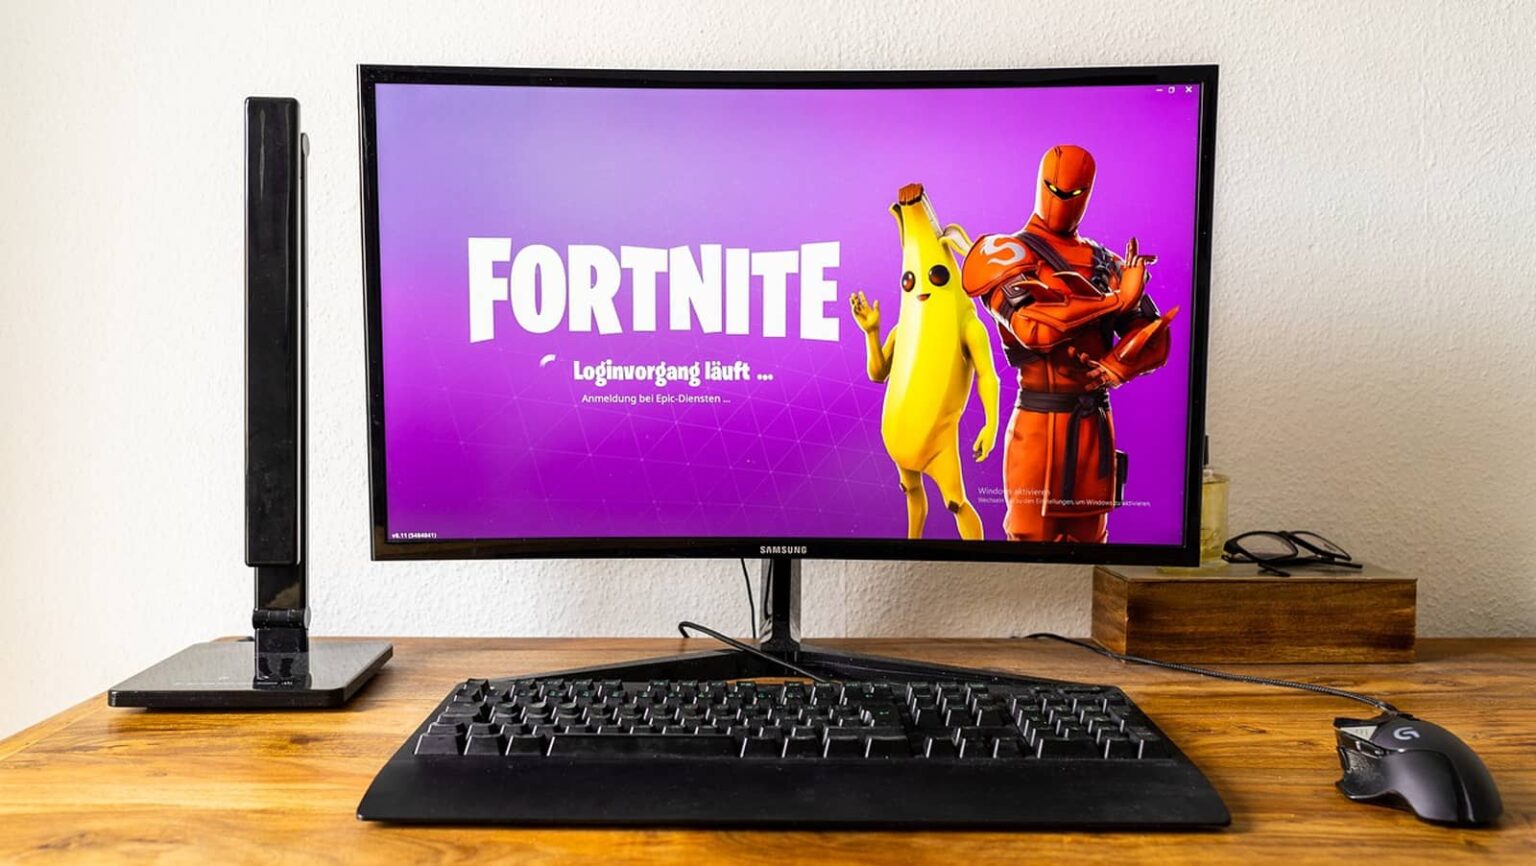 What can we expect from the 2020 Fortnite World Cup?